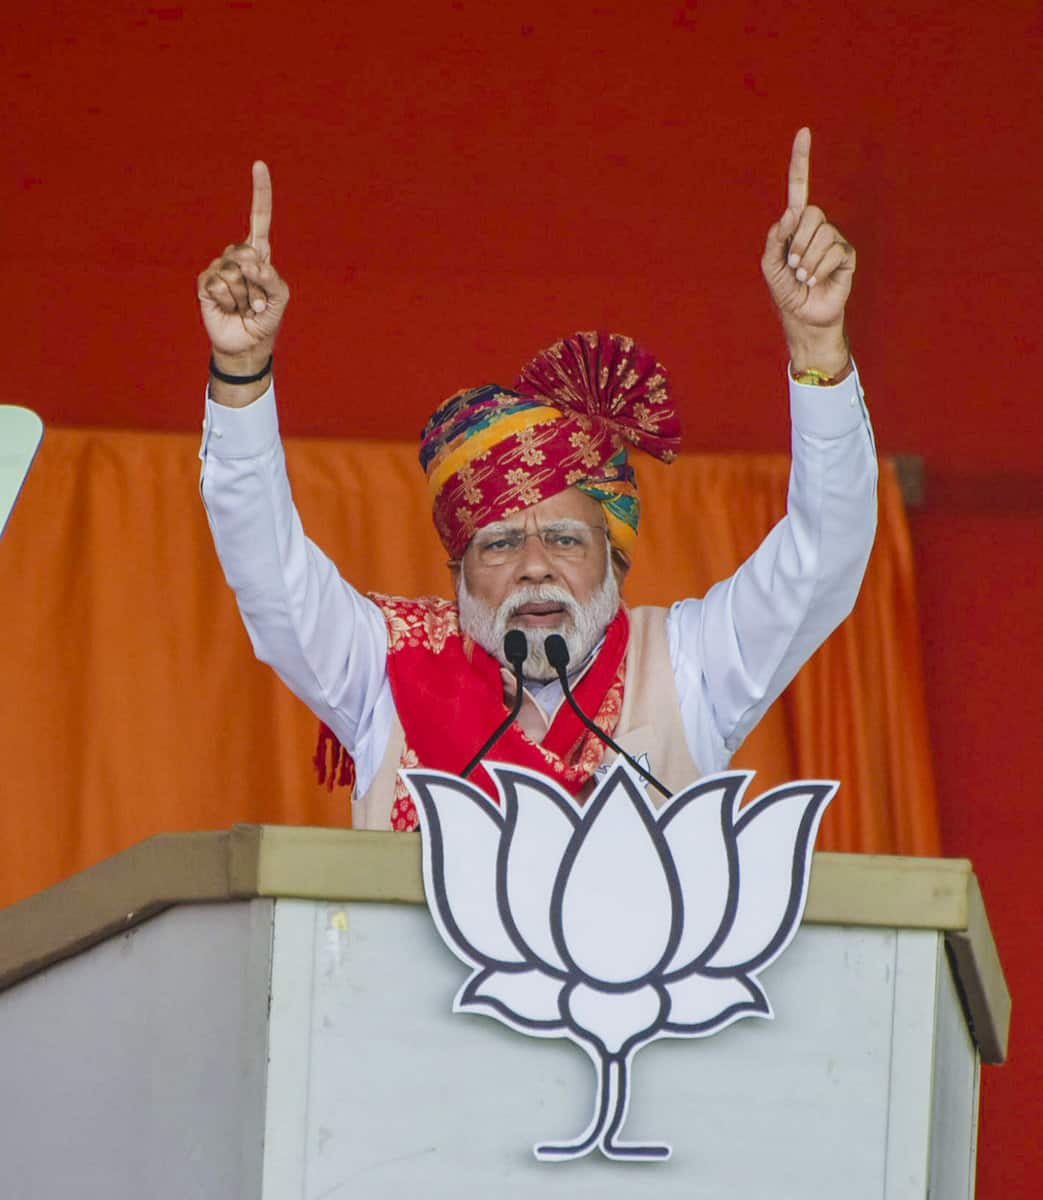 BJP's resolve is to send corrupt BRS leaders to jail: Modi